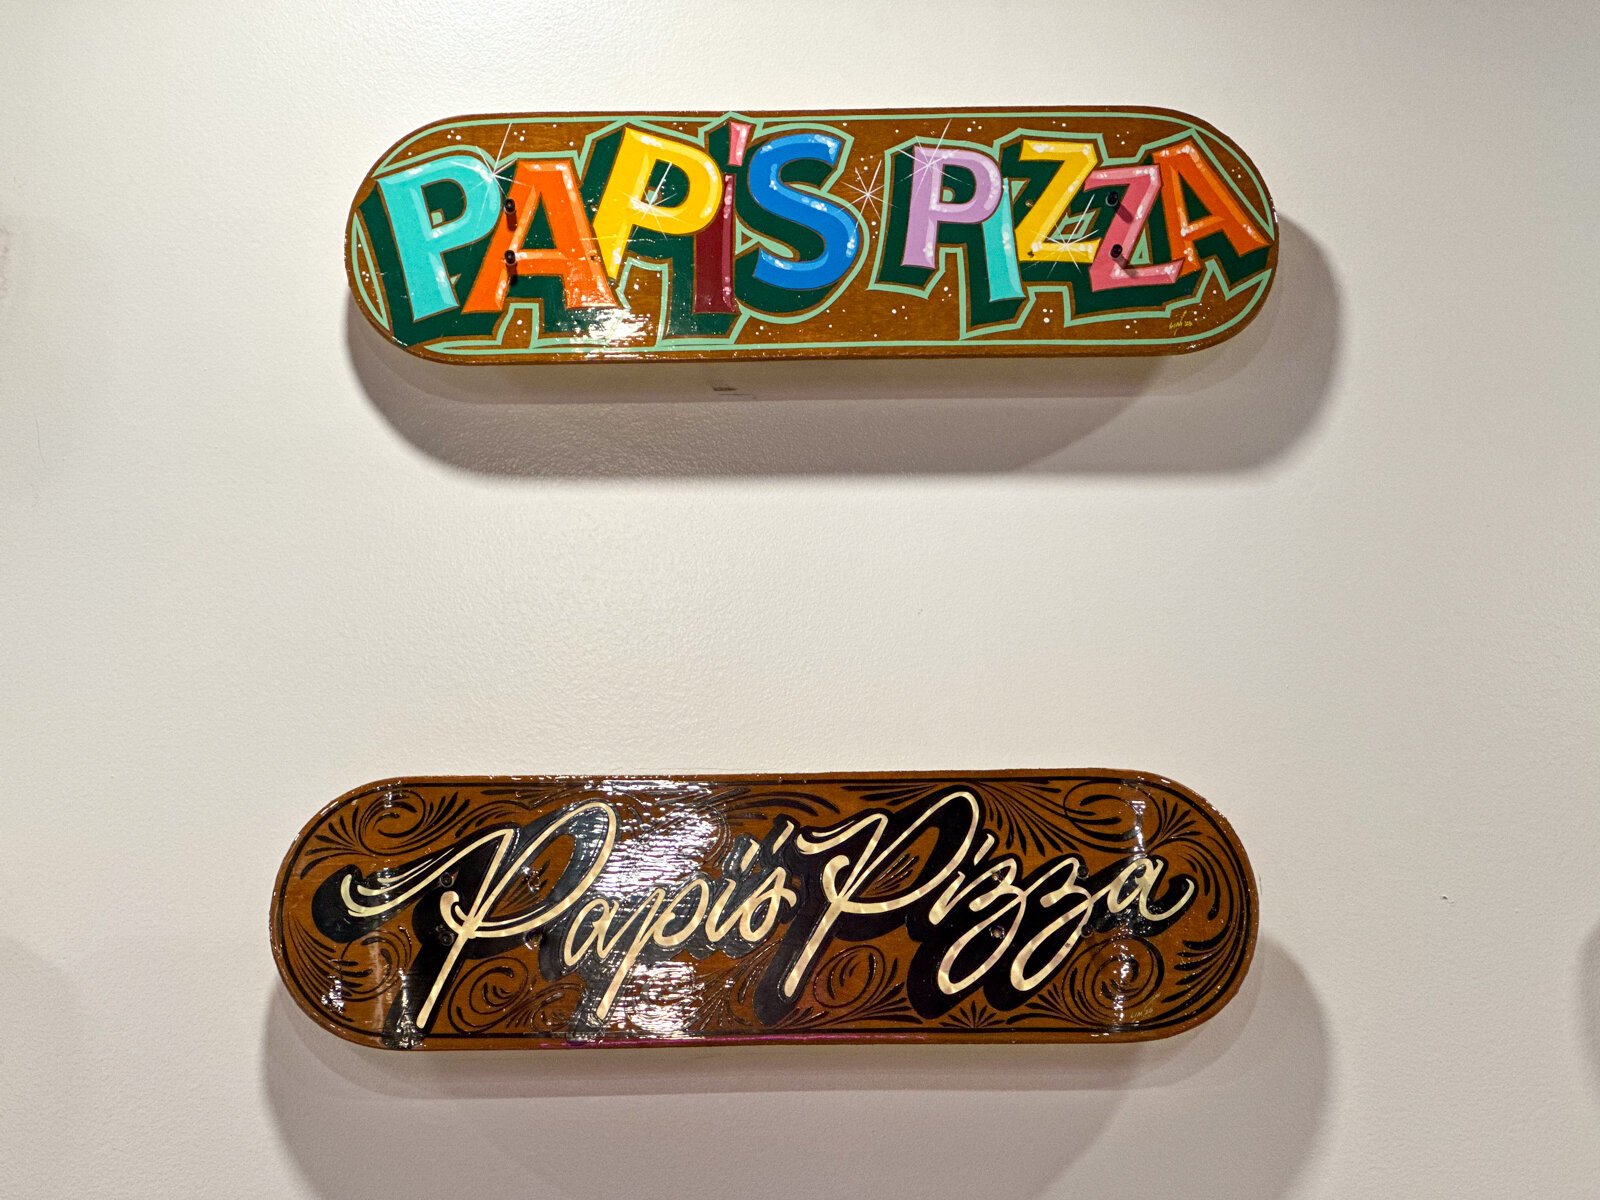 Skate decks painted by local artists inside Papi's Pizza Company on The Landing in Downtown Fort Wayne.